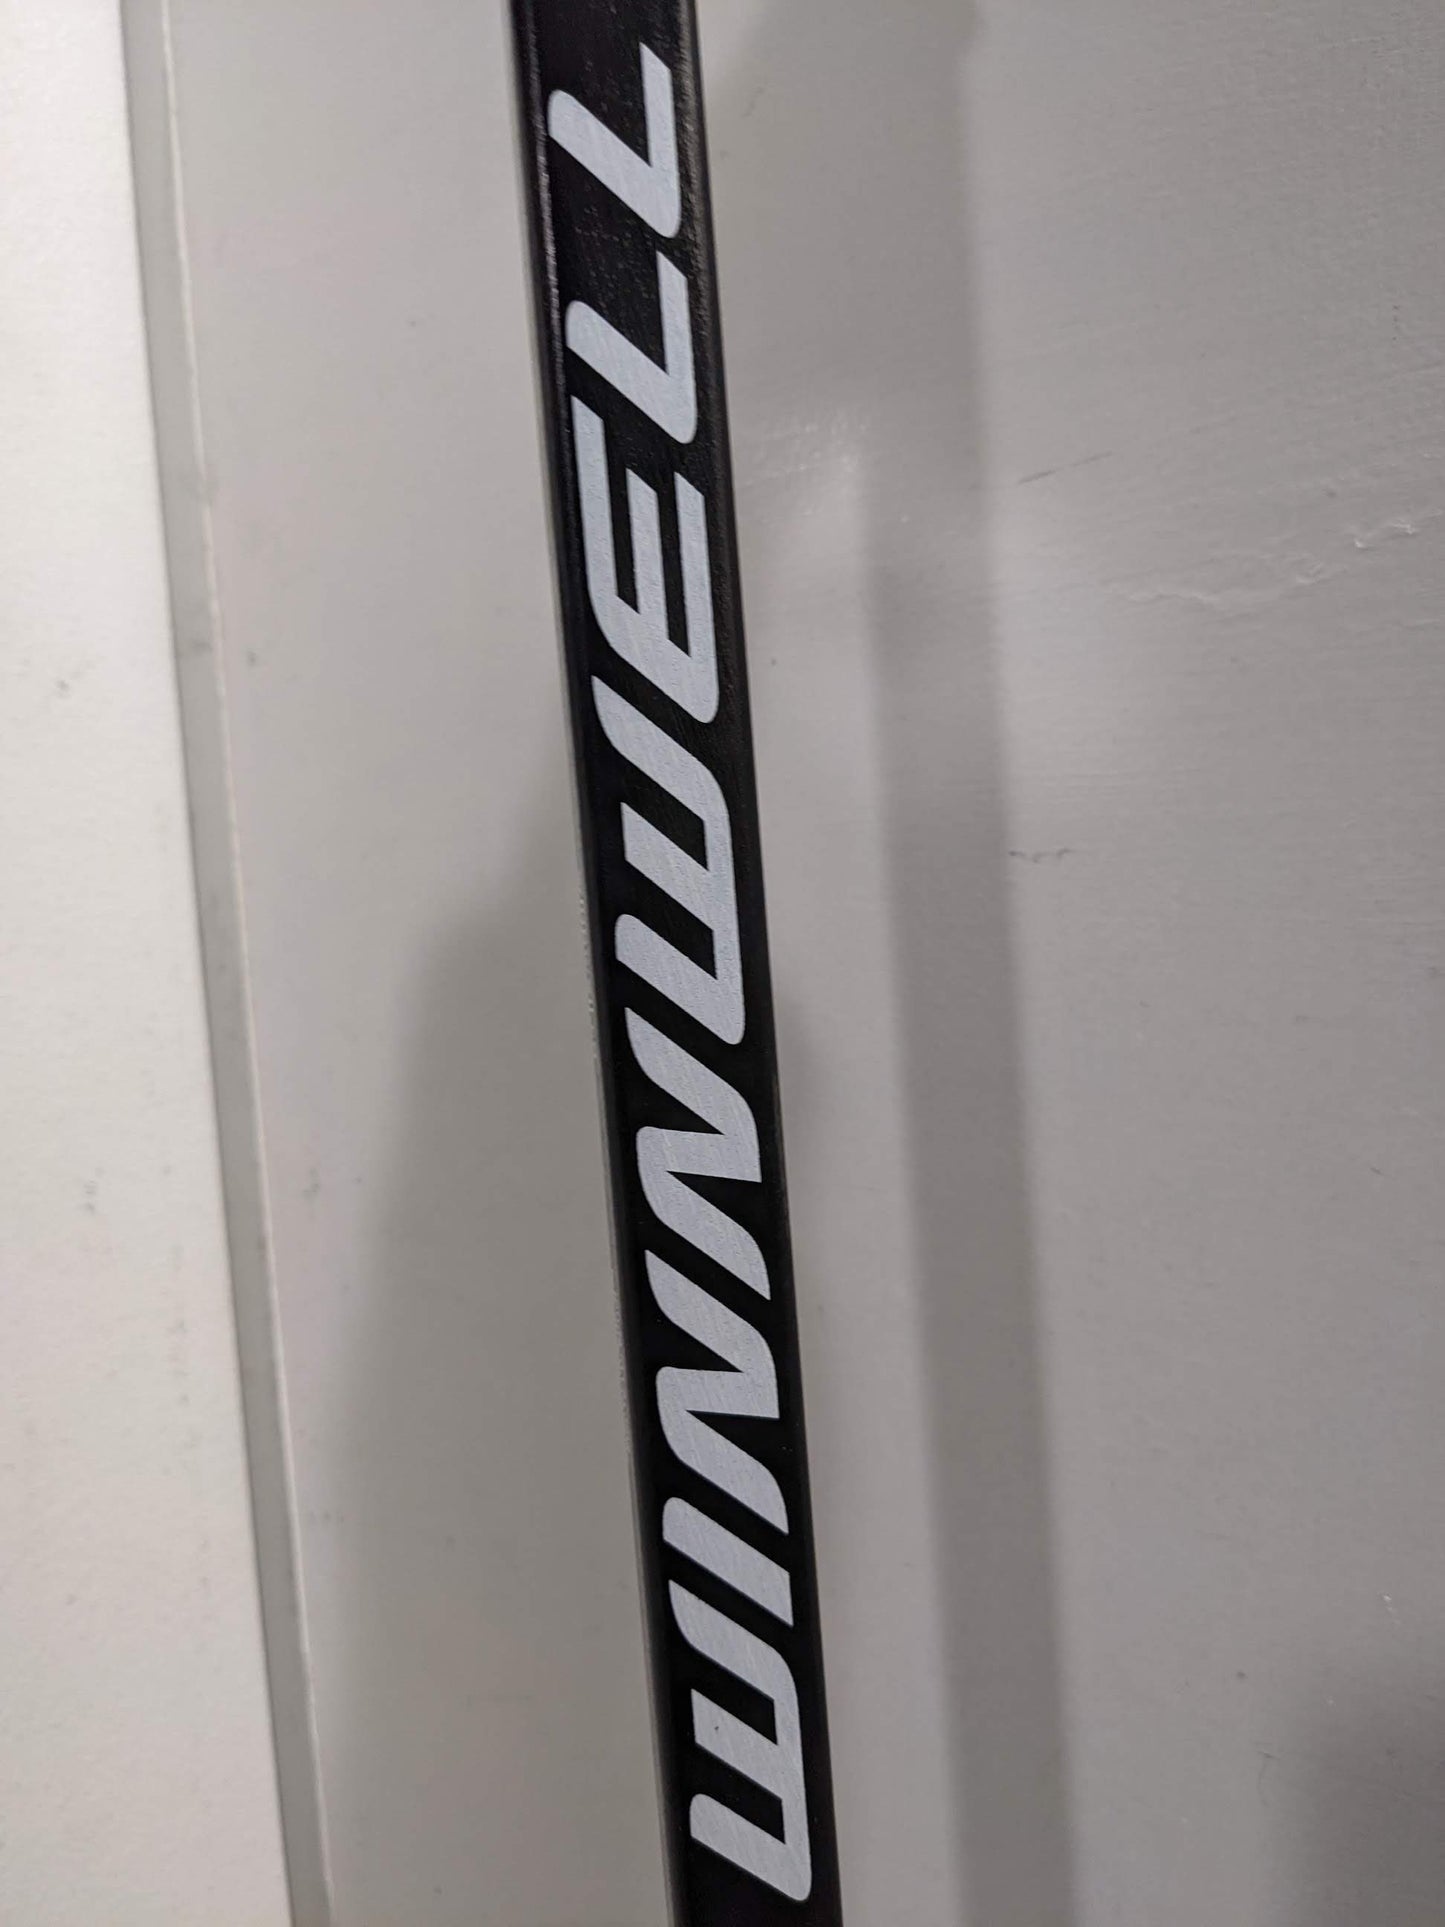 Winnwell Youth Hockey Stick RXW1 Flex PS119 Condition is "New"